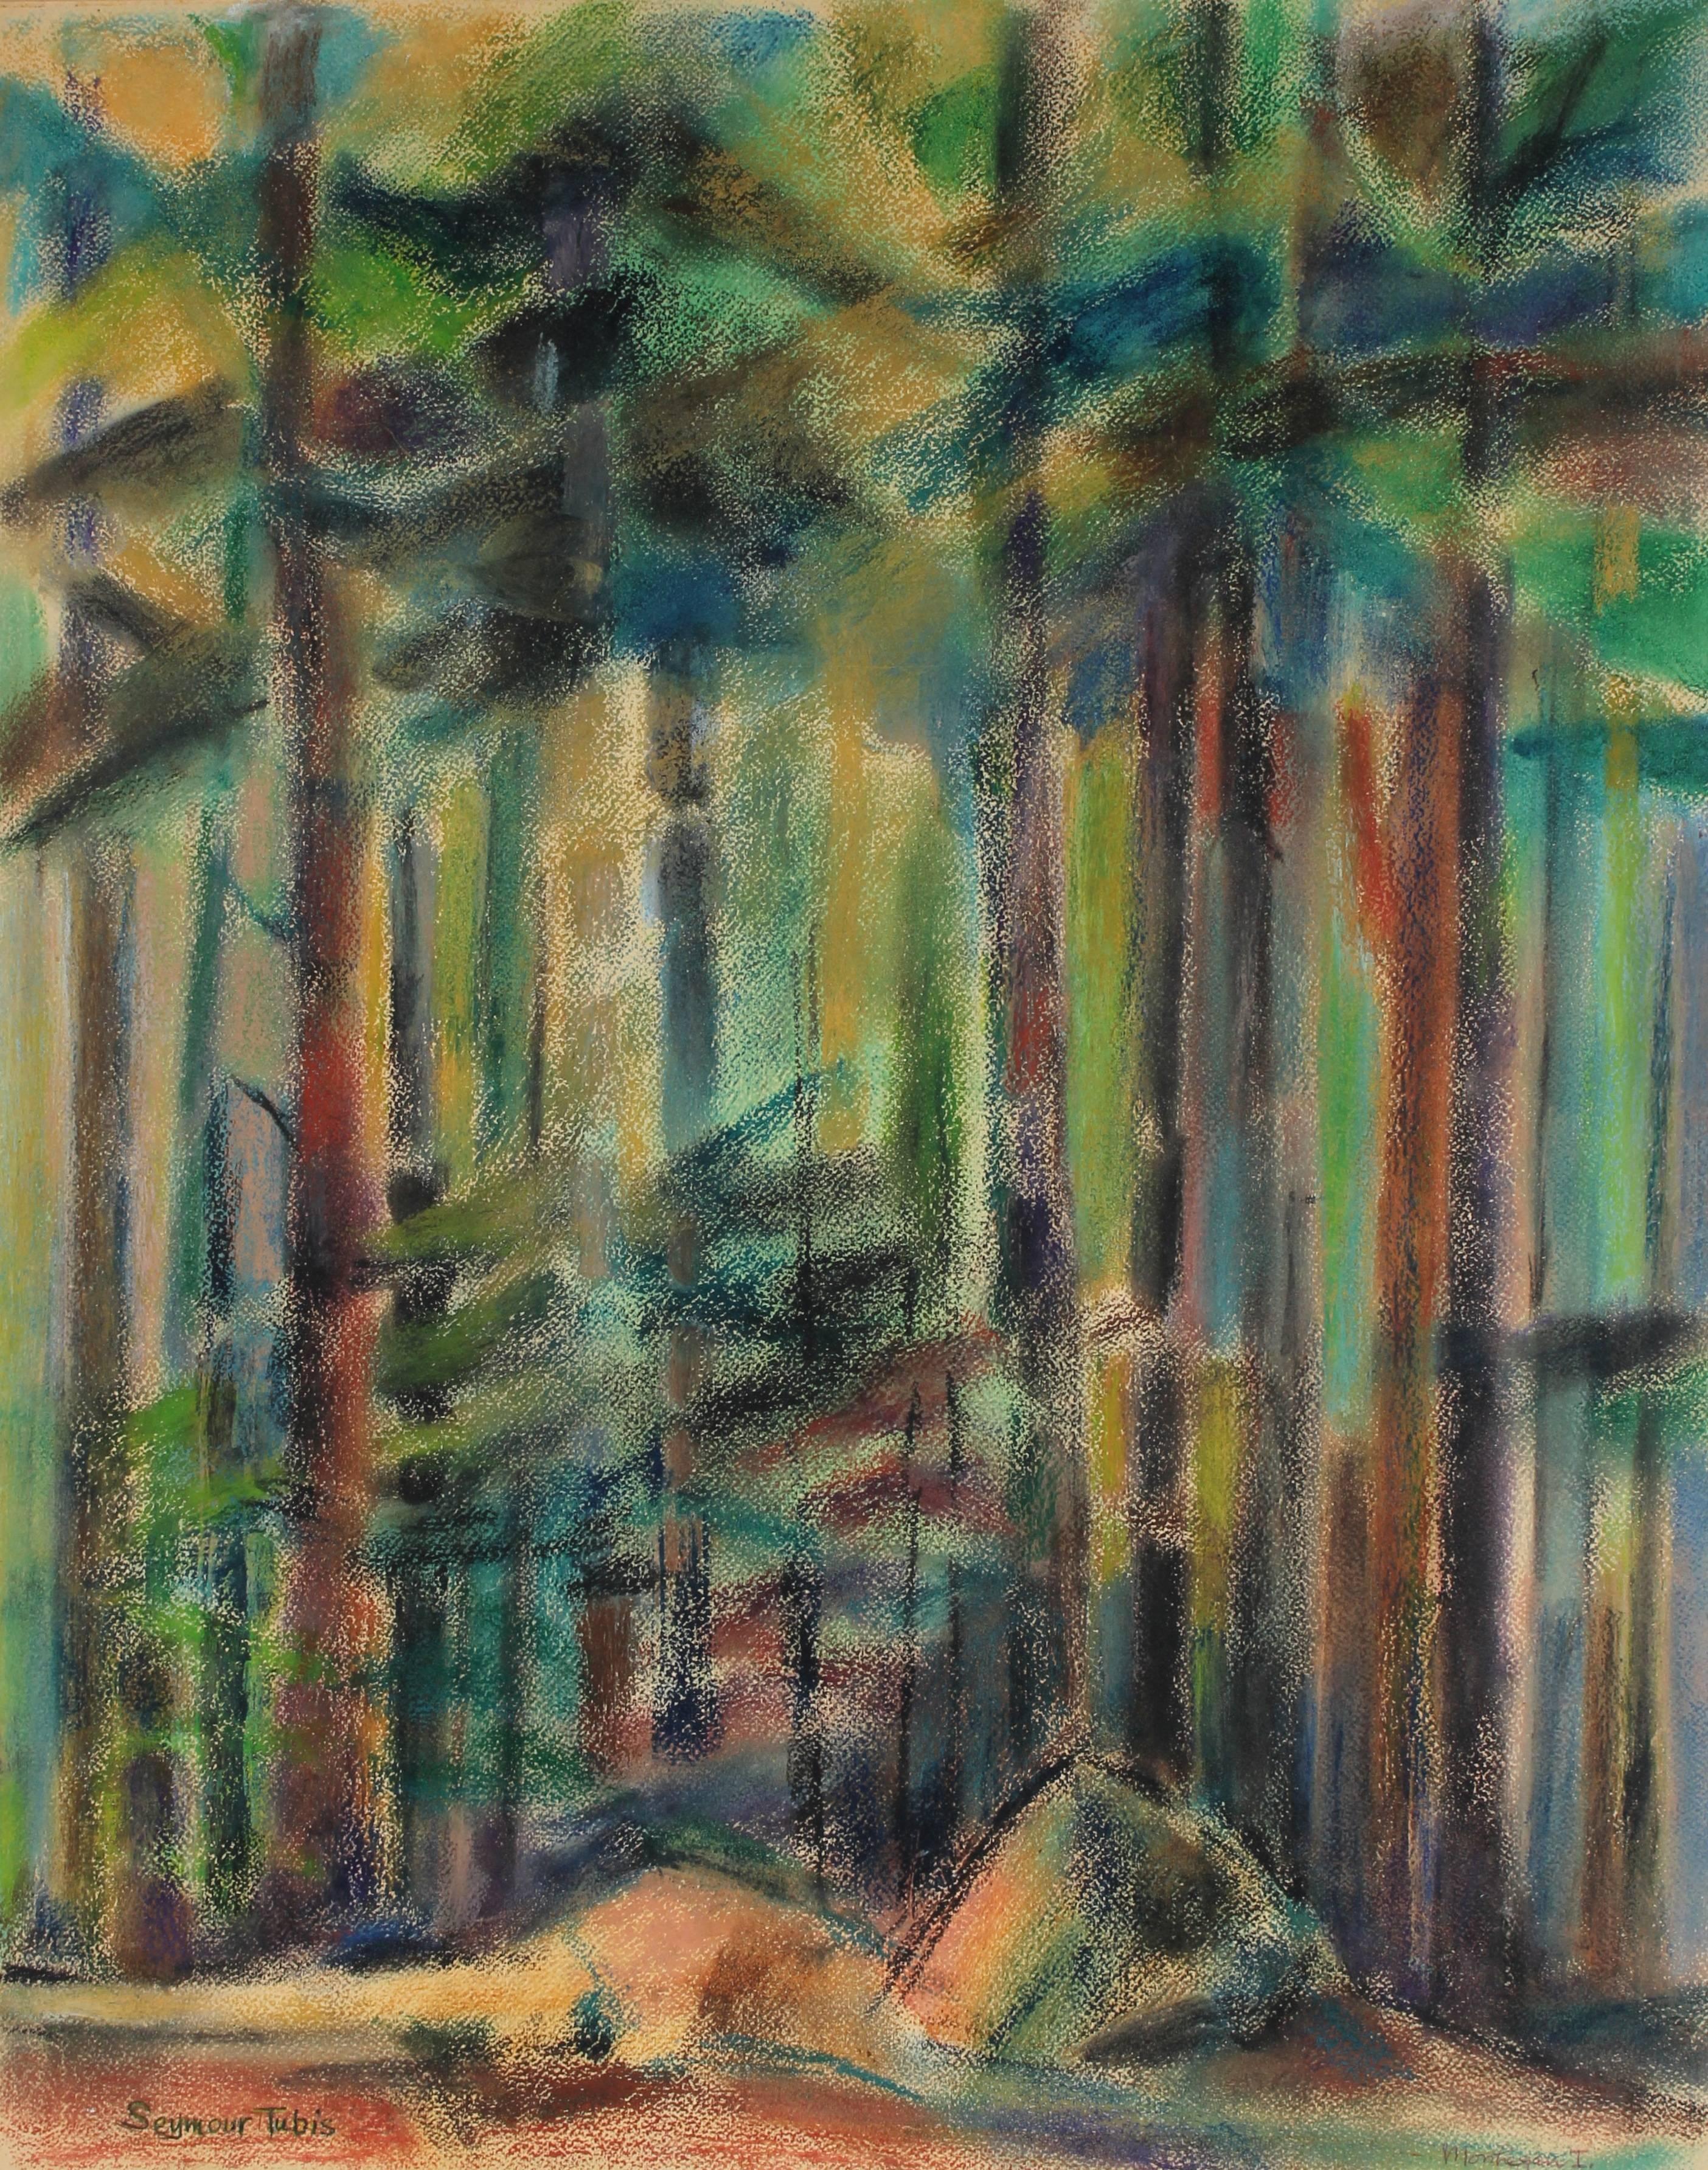 Seymour Tubis Landscape Art - Abstracted Forest Landscape in Pastel, 1962